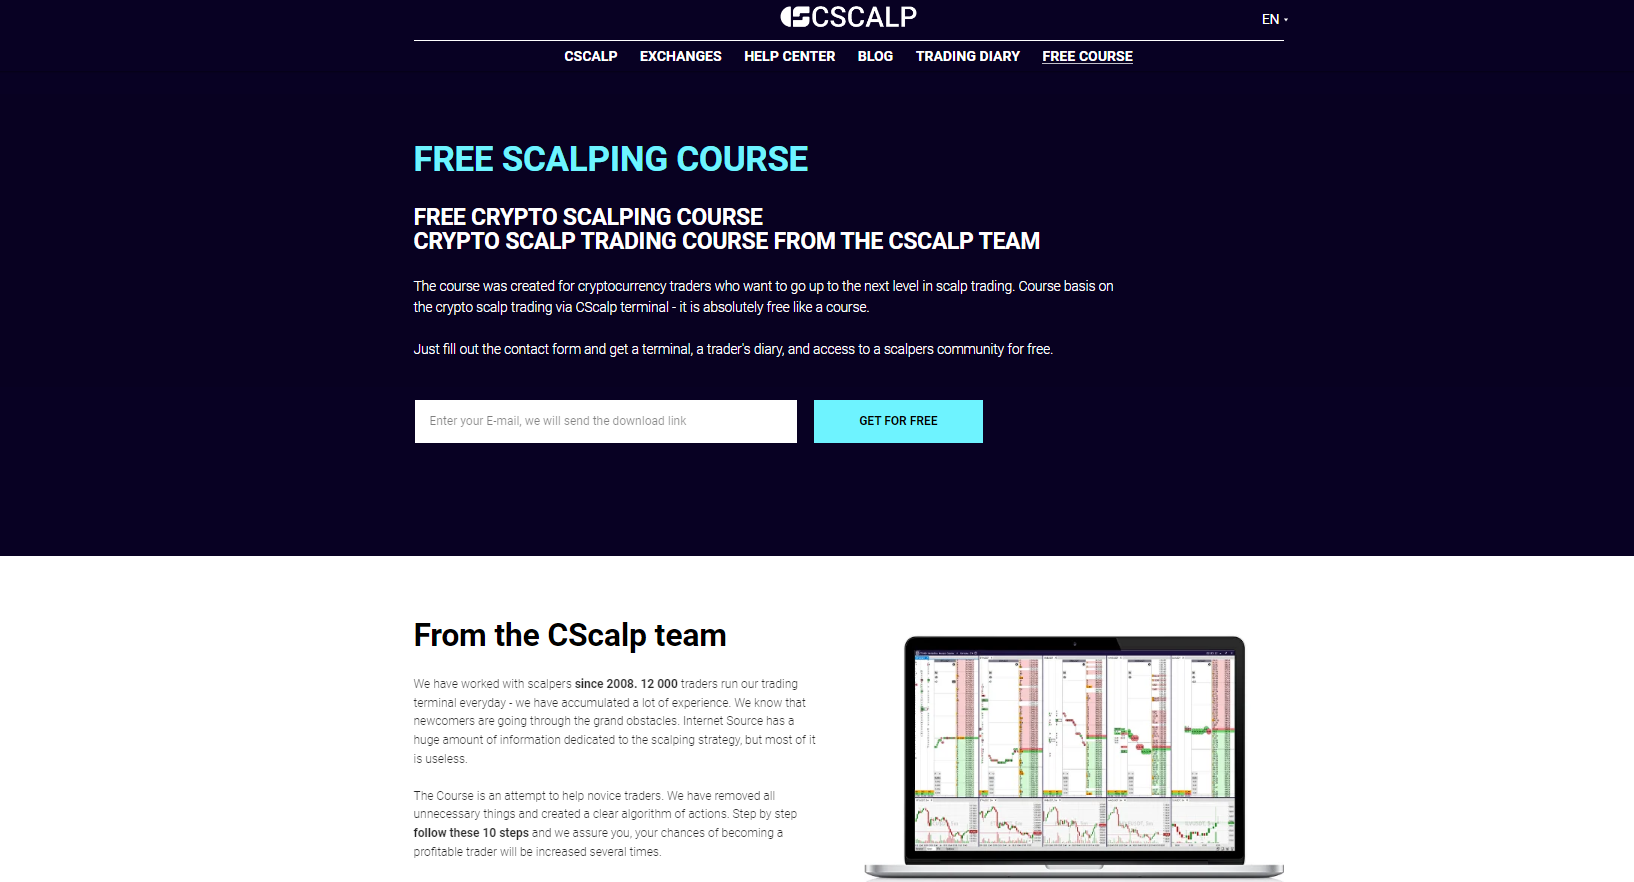 CScalp’s free trading course